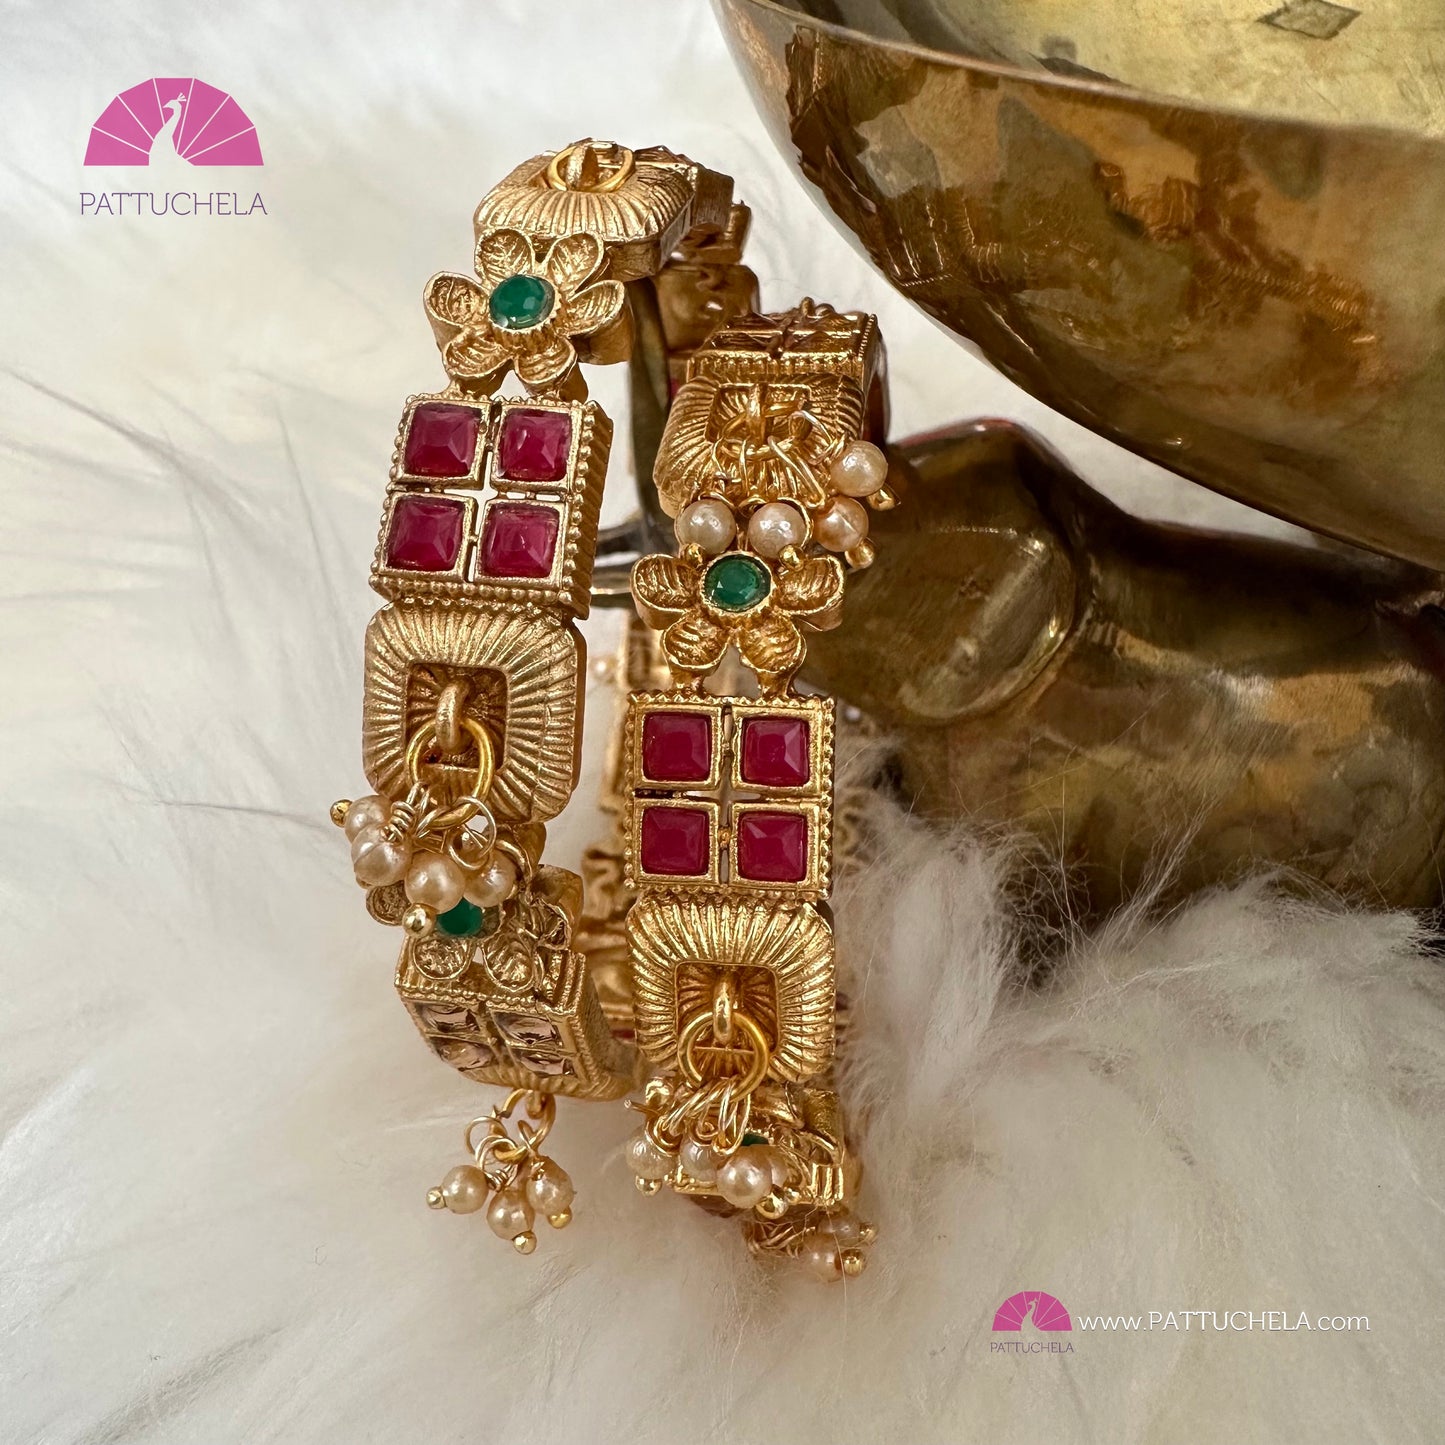 Pair of Gold tone Bangles with multi colour stones and pearls | Stone Bangles | Kada | Pearl Bangles | Indian Jewelry